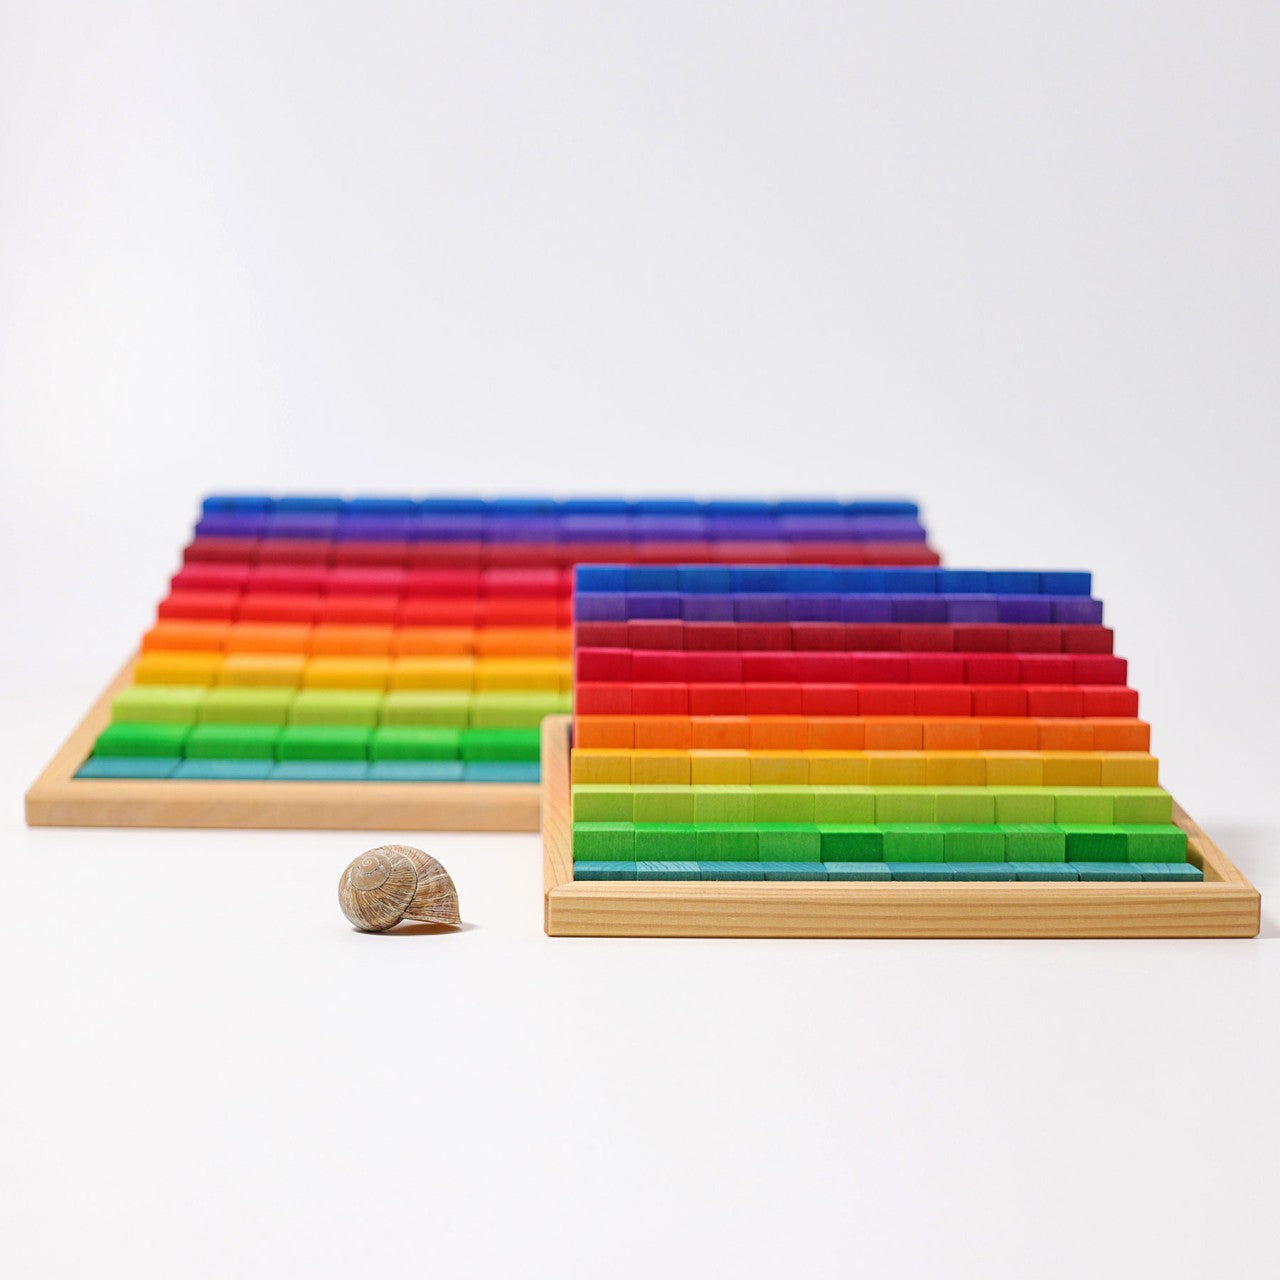 Small Stepped Counting Blocks | Building Set | Wooden Toys for Kids | Open-Ended Play